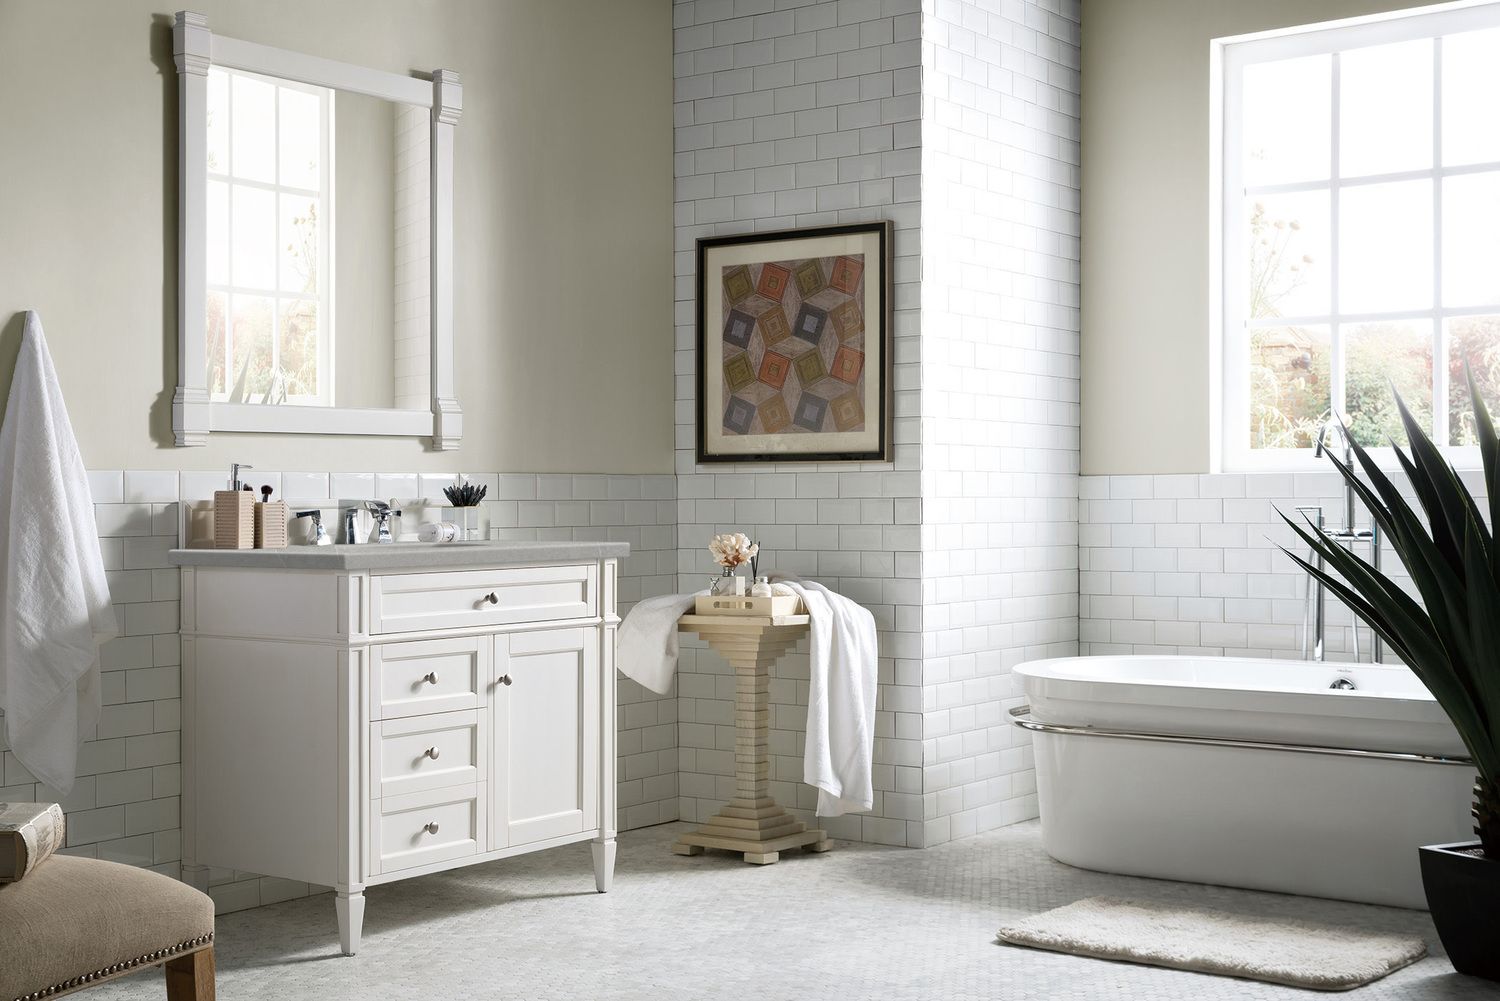 72 inch bathroom vanity clearance James Martin Vanity Bright White Transitional